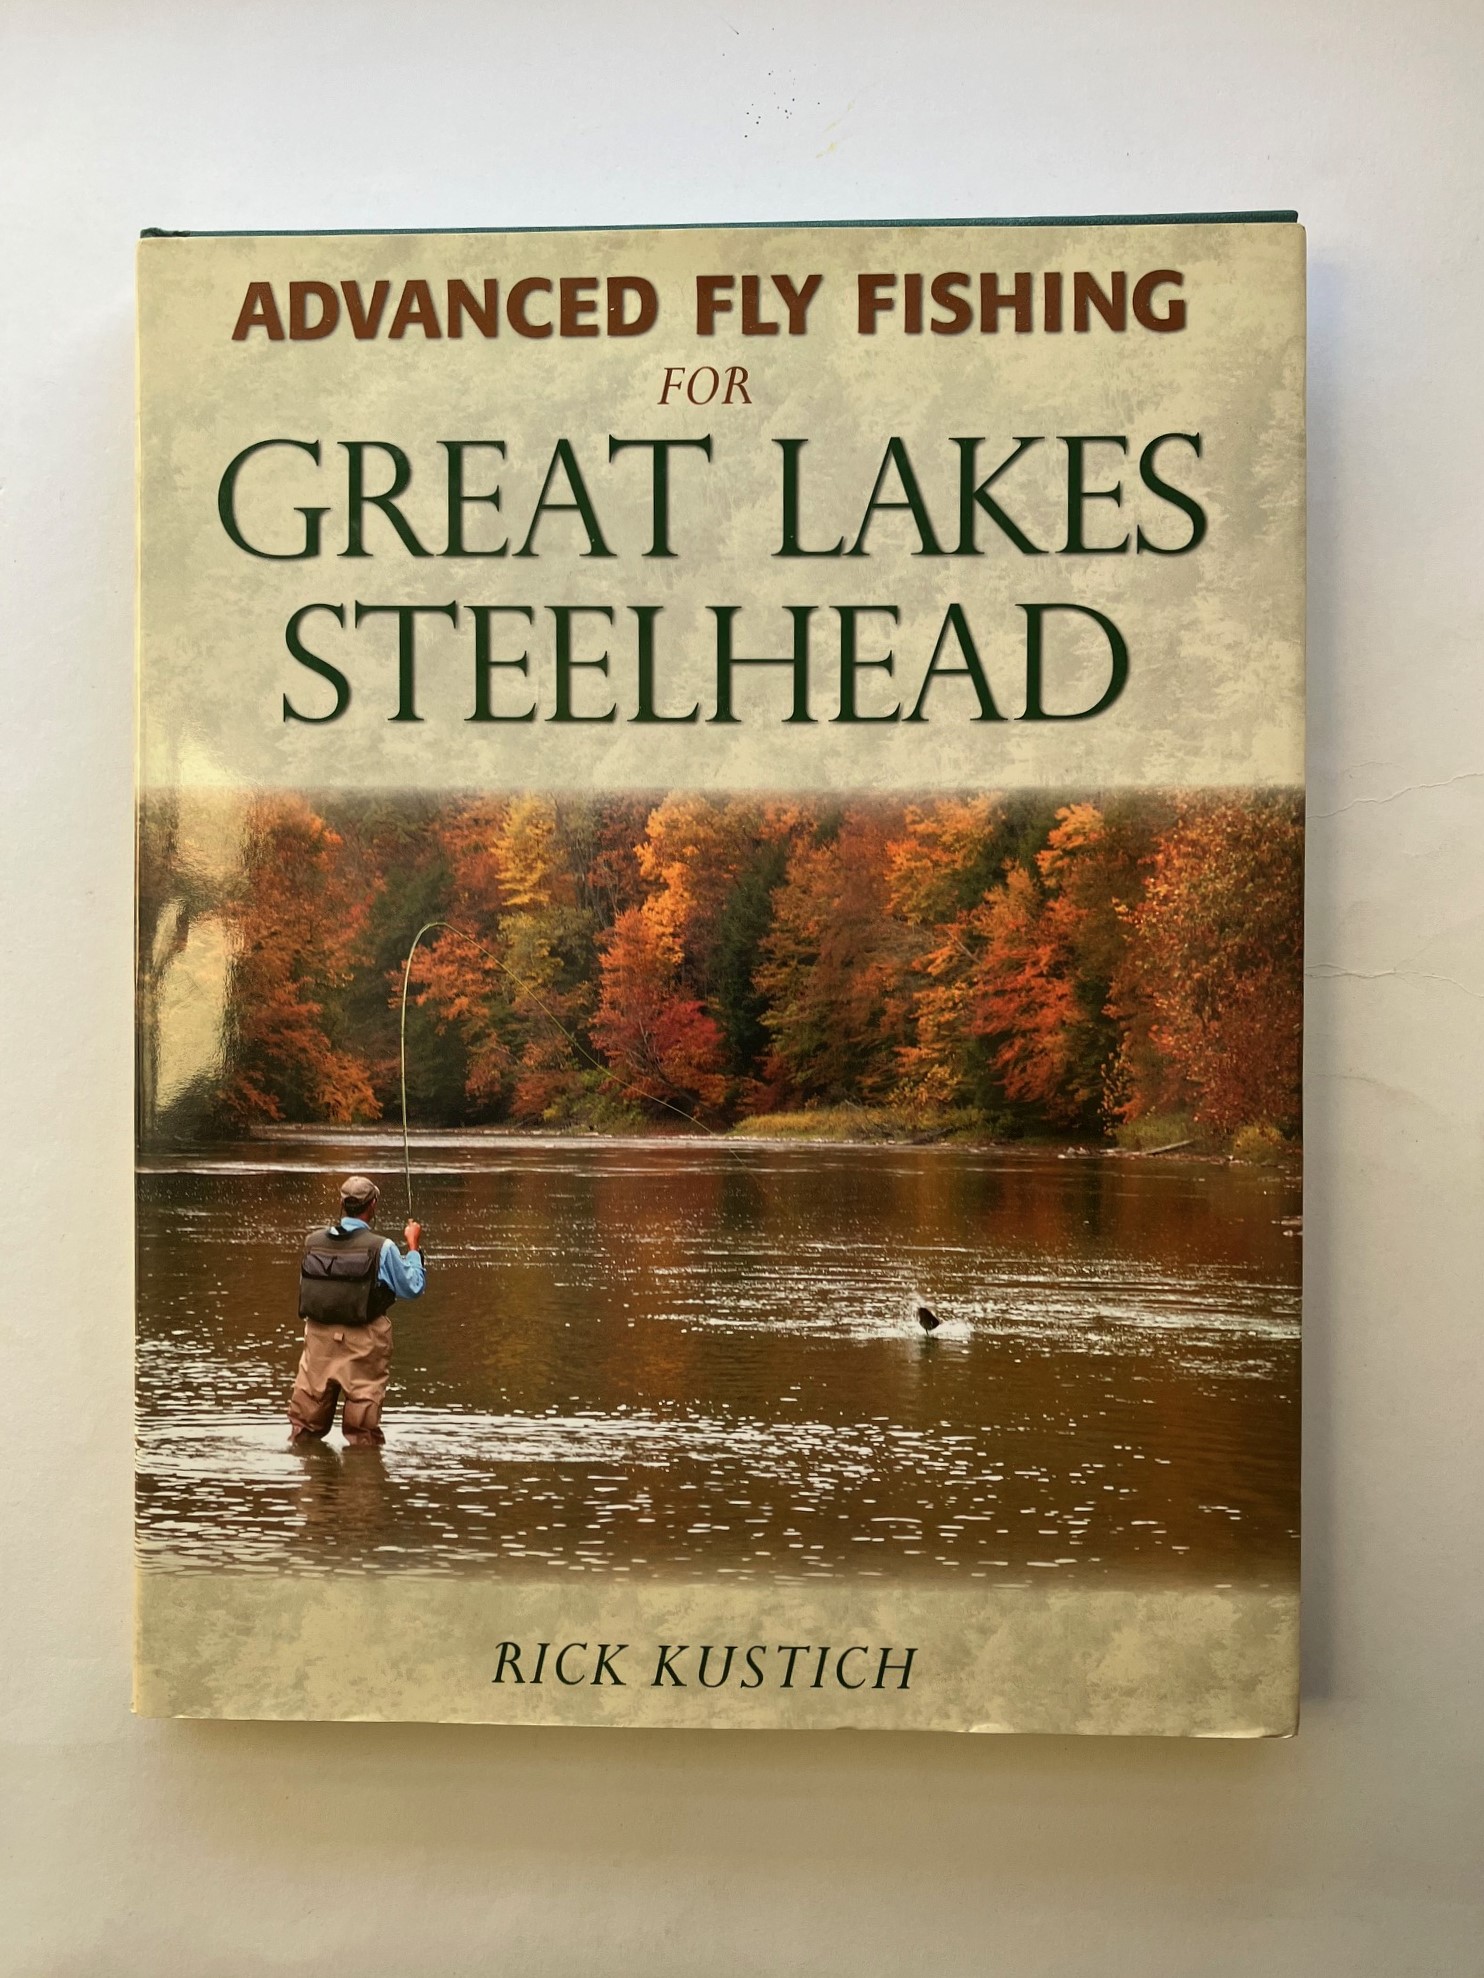 Used Fishing Books and DVDs